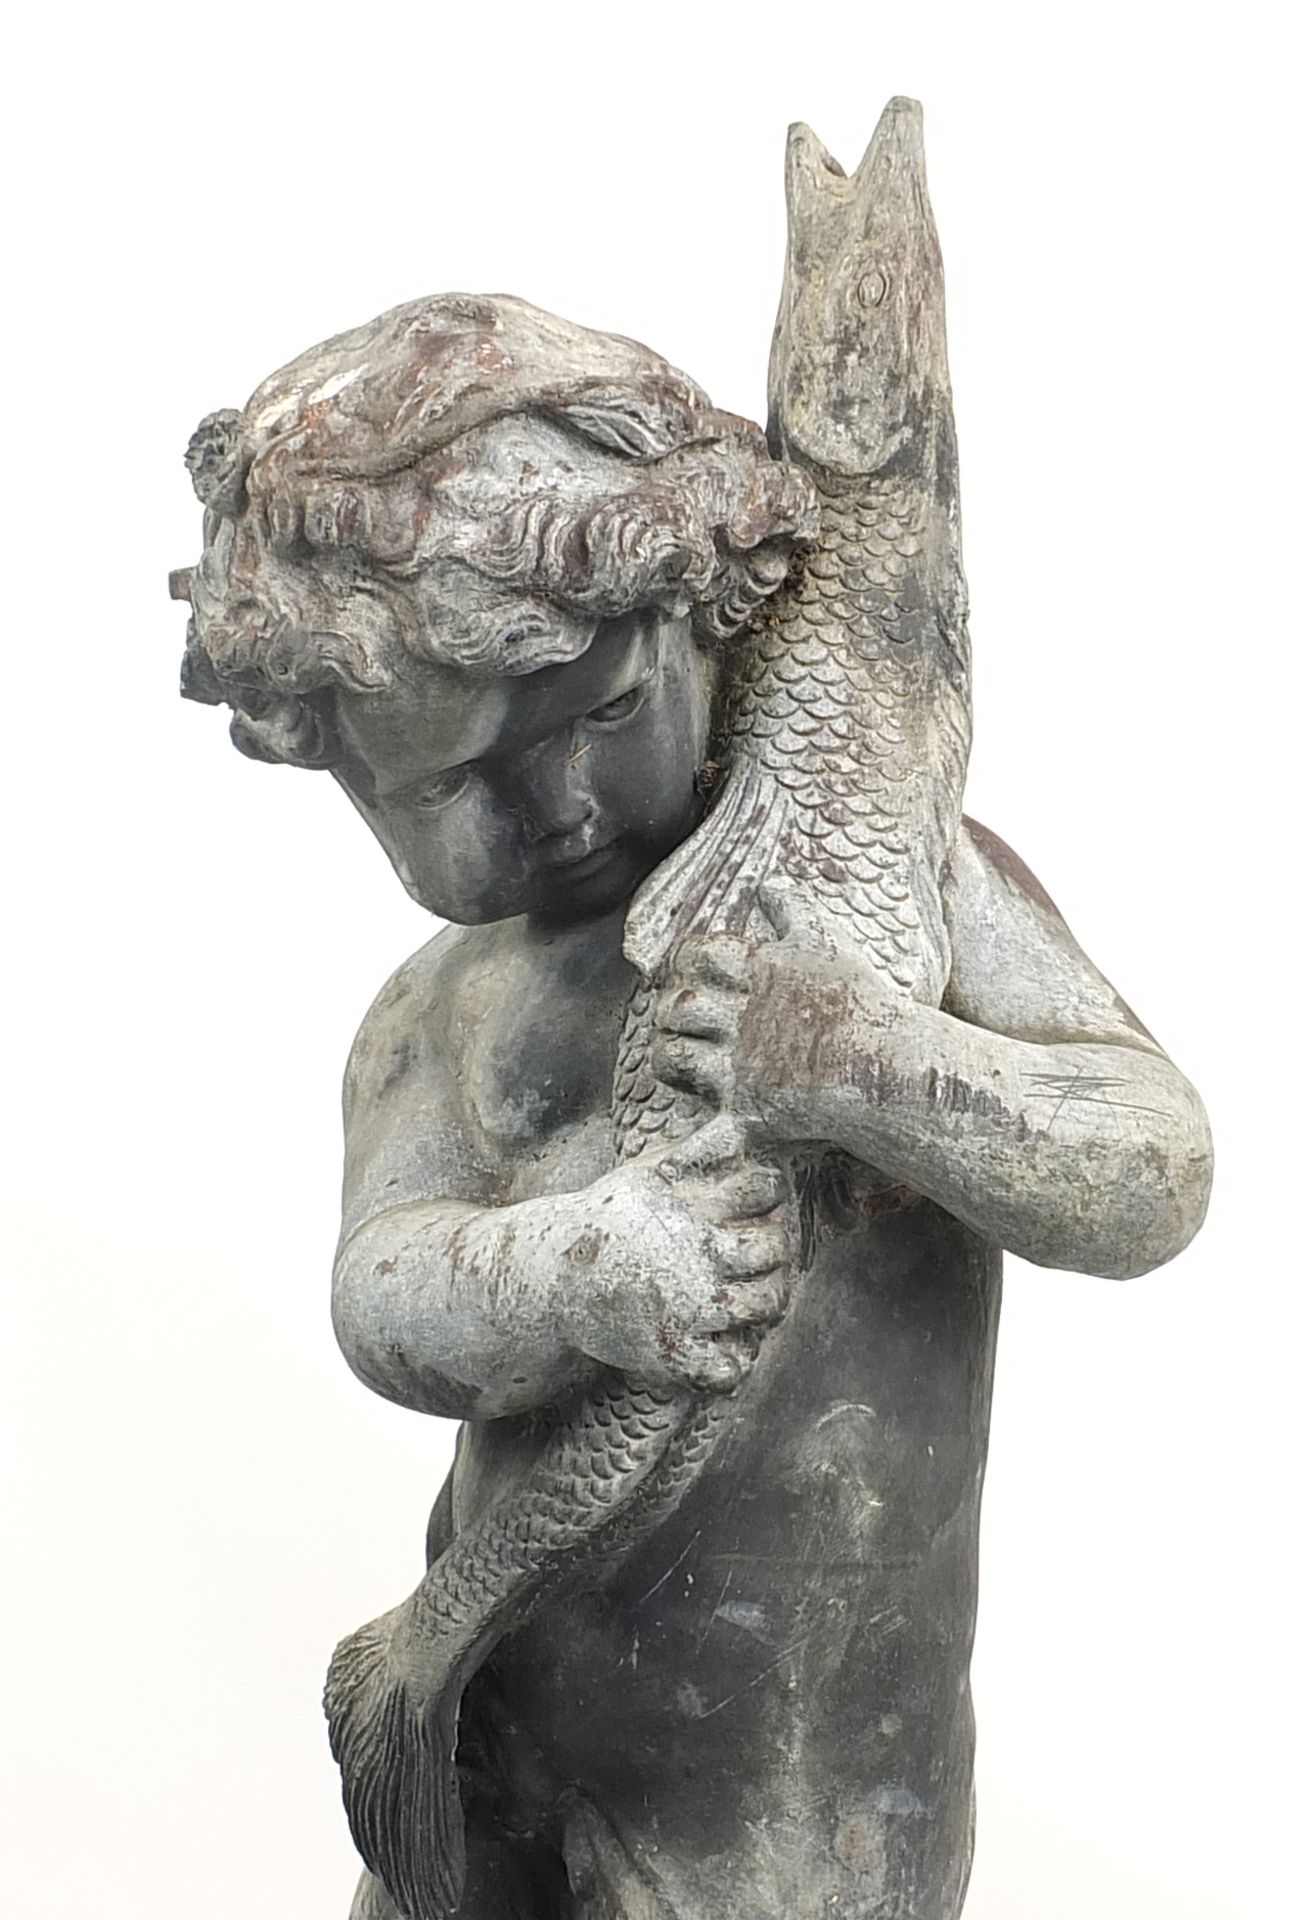 Lead garden water feature of Putti holding a fish, raised on a square concrete base, 145cm high - Image 2 of 3